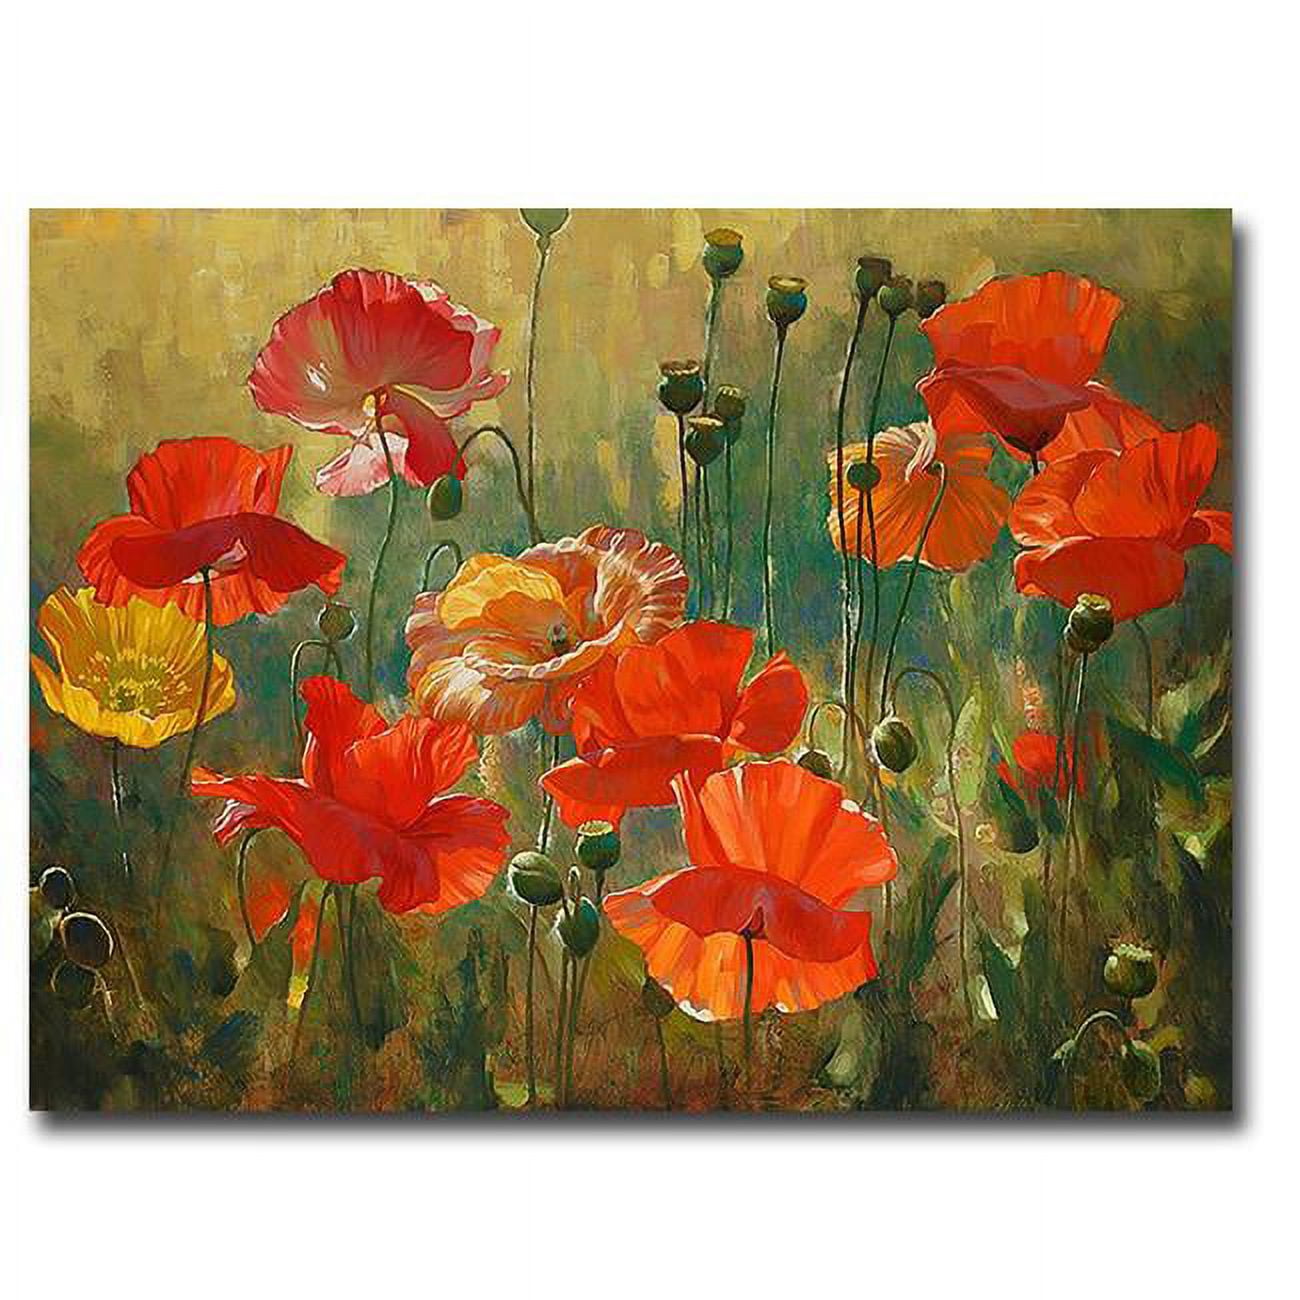 1216p374ig Poppy Fields By Emma Styles Premium Gallery-wrapped Canvas Giclee Art - 12 X 16 X 1.5 In.